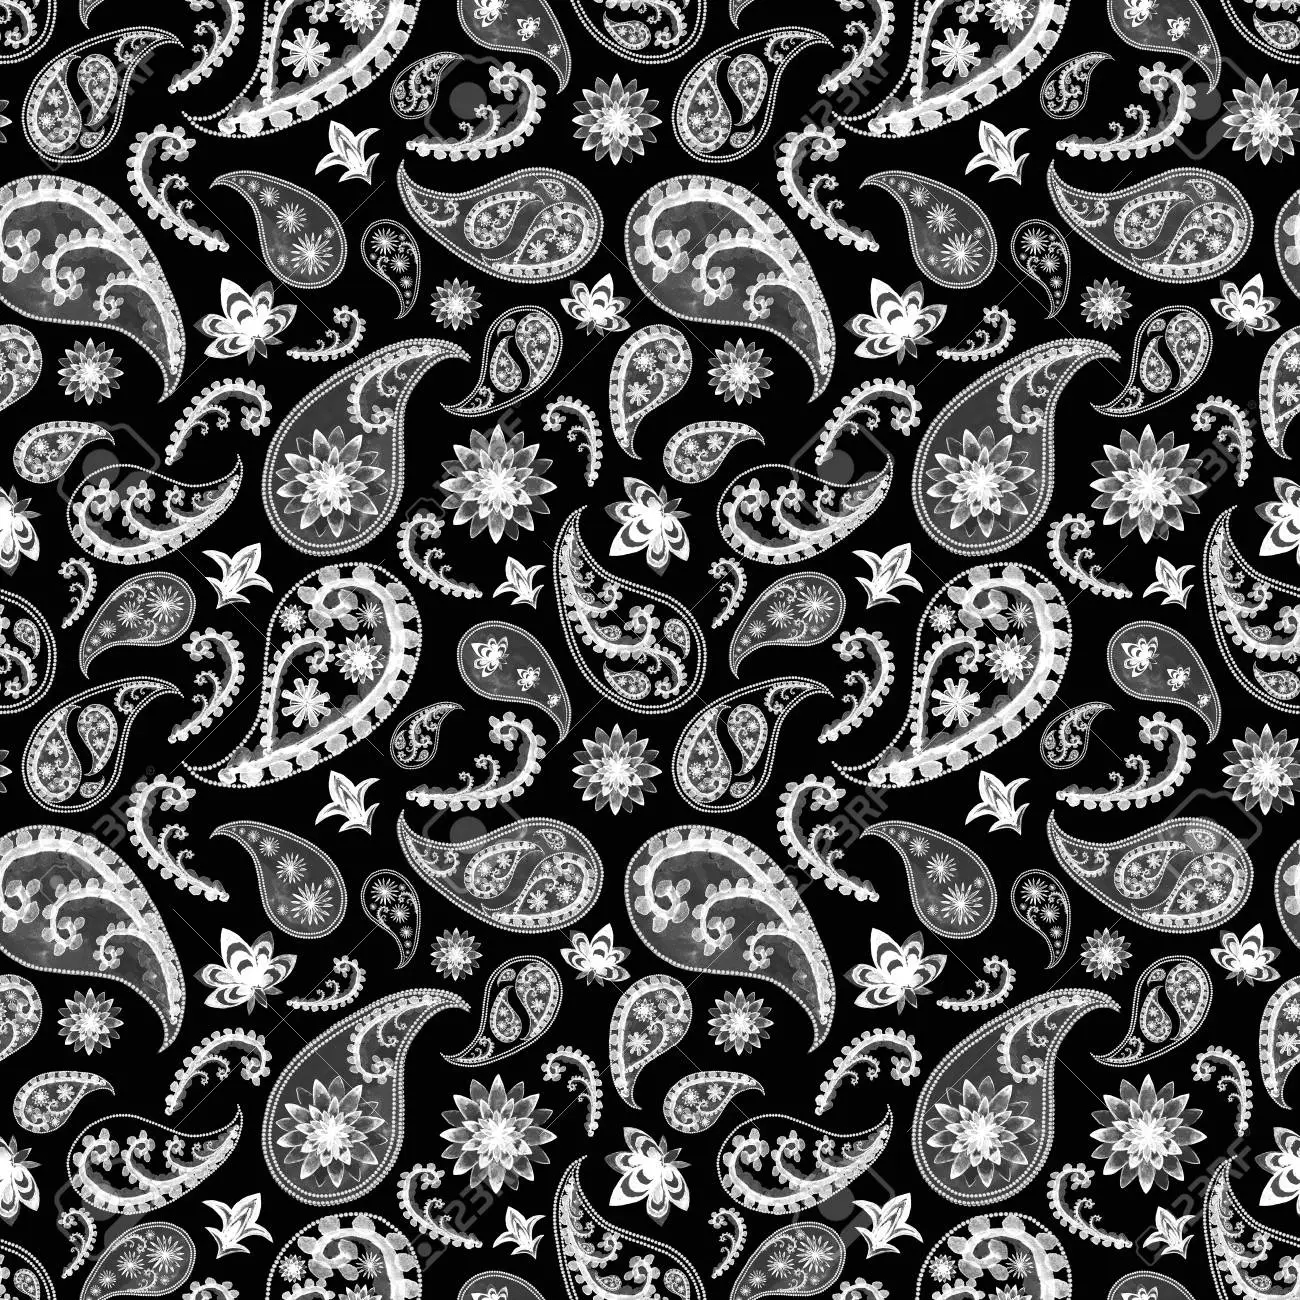 Black Paisley Fabric, Wallpaper and Home Decor